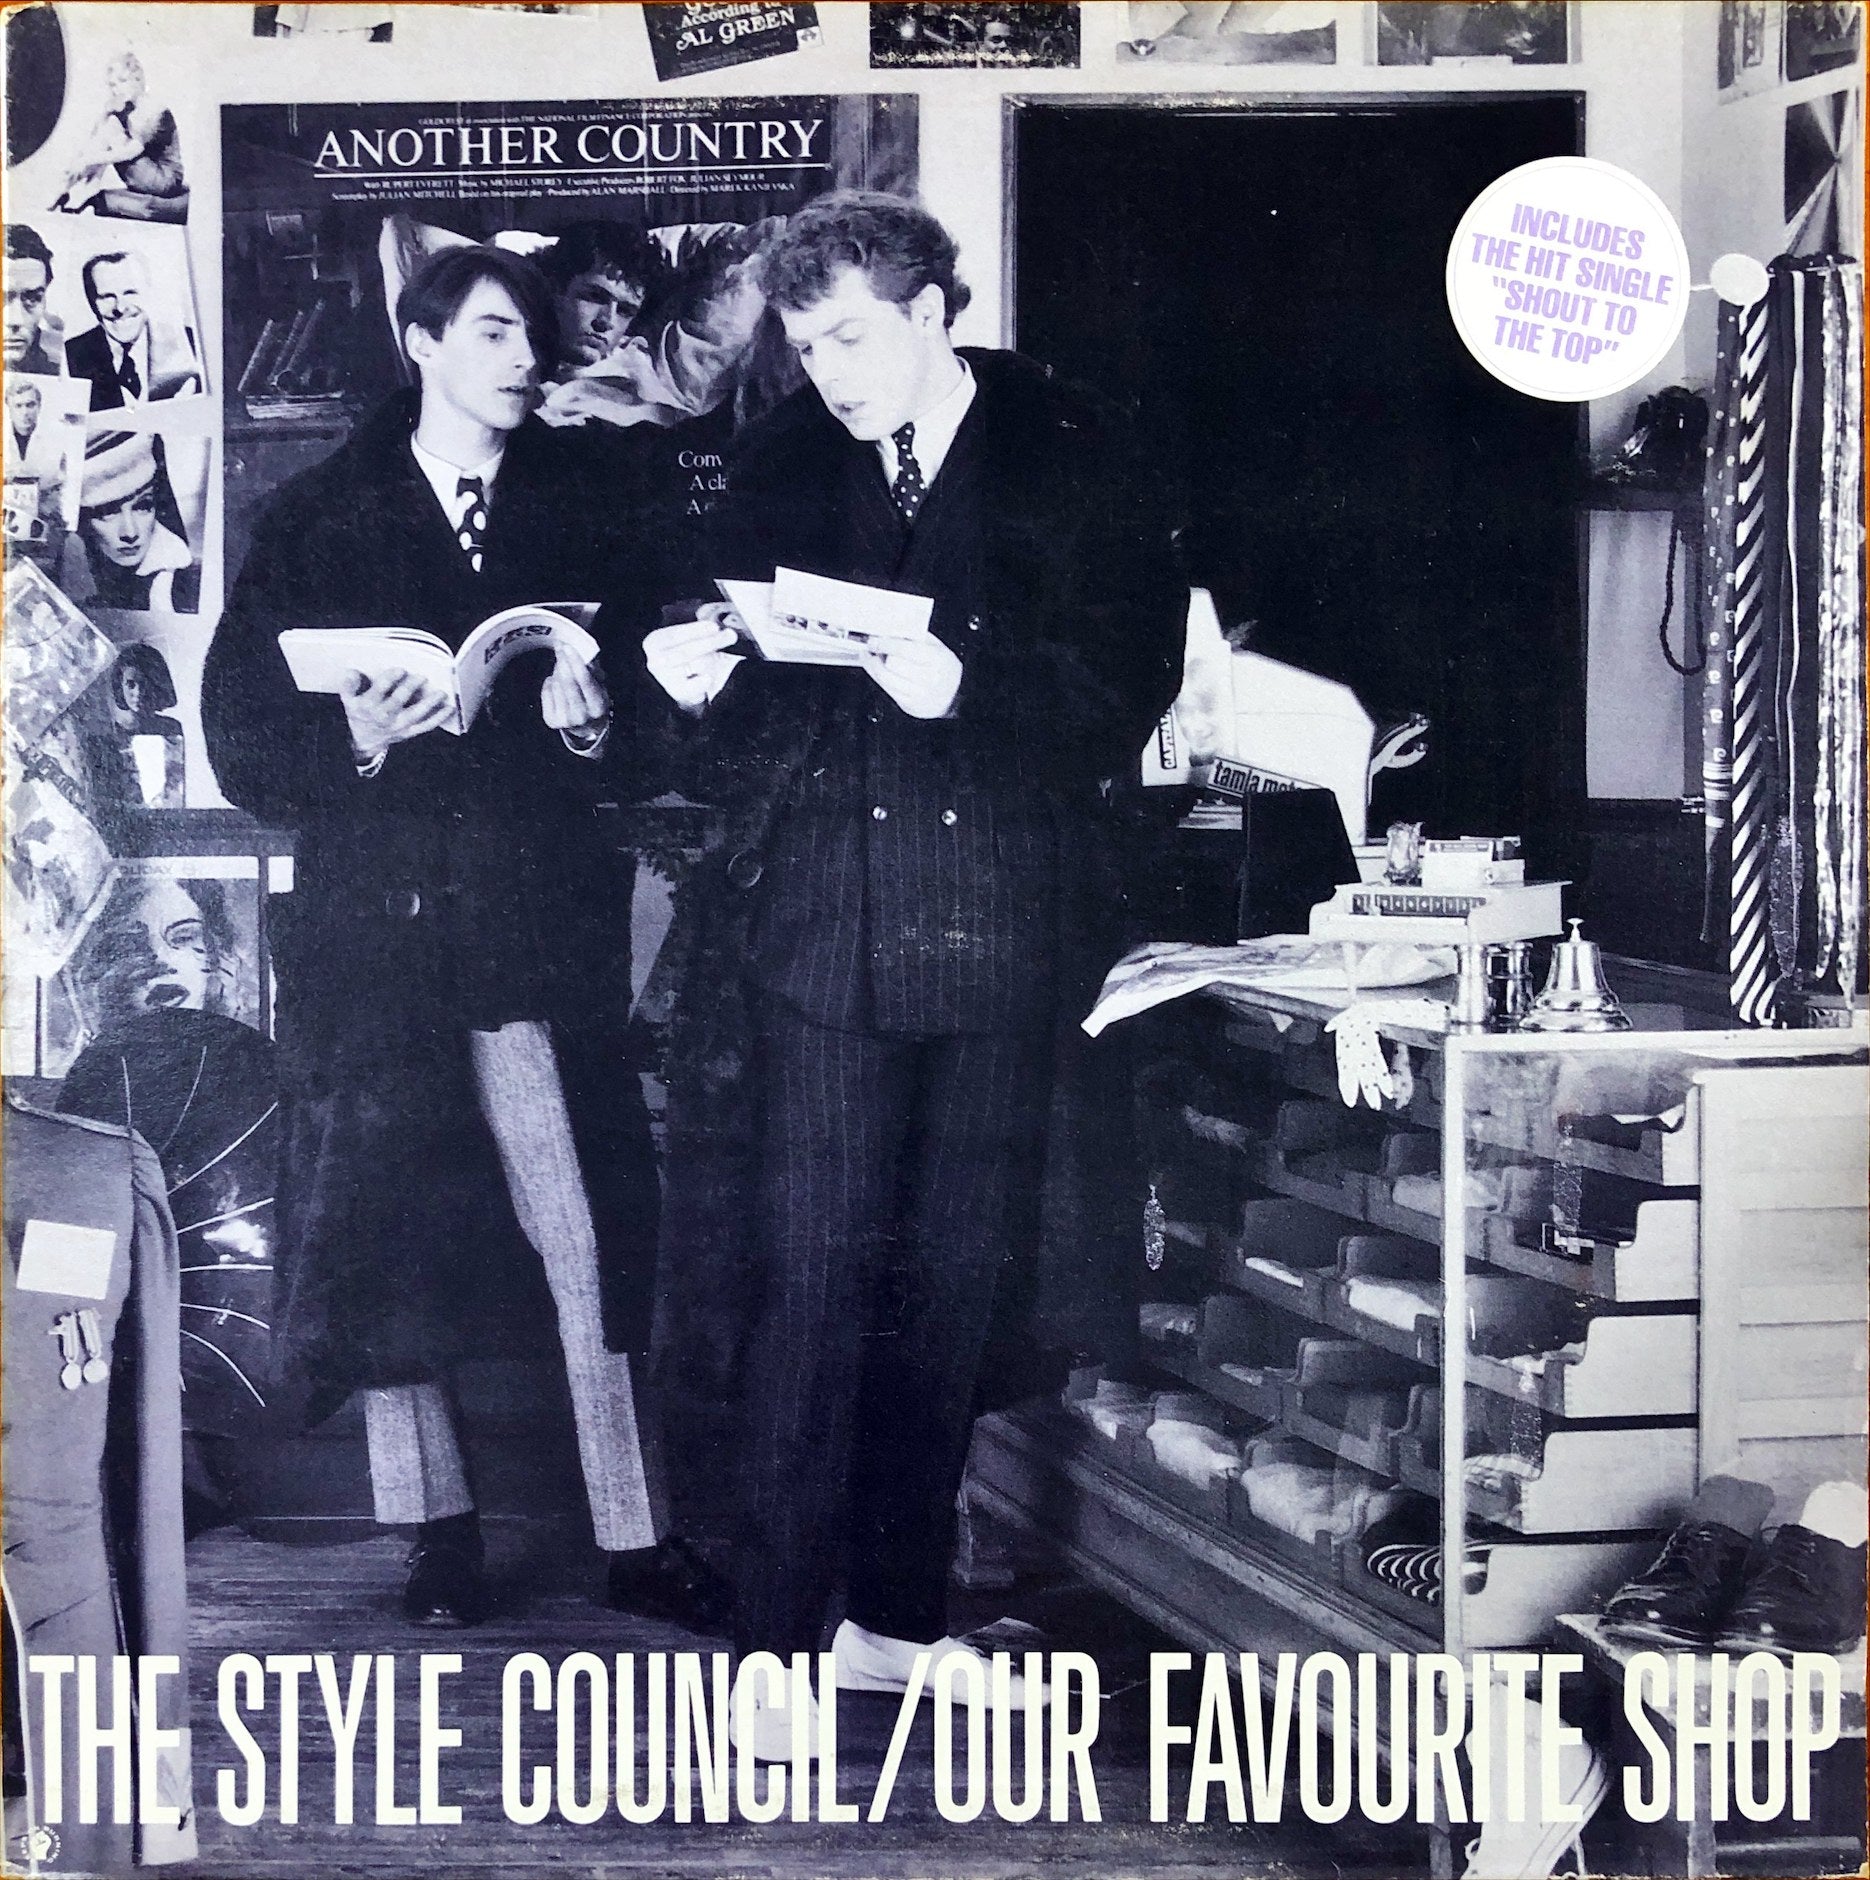 album or cover the style council our favourite shop